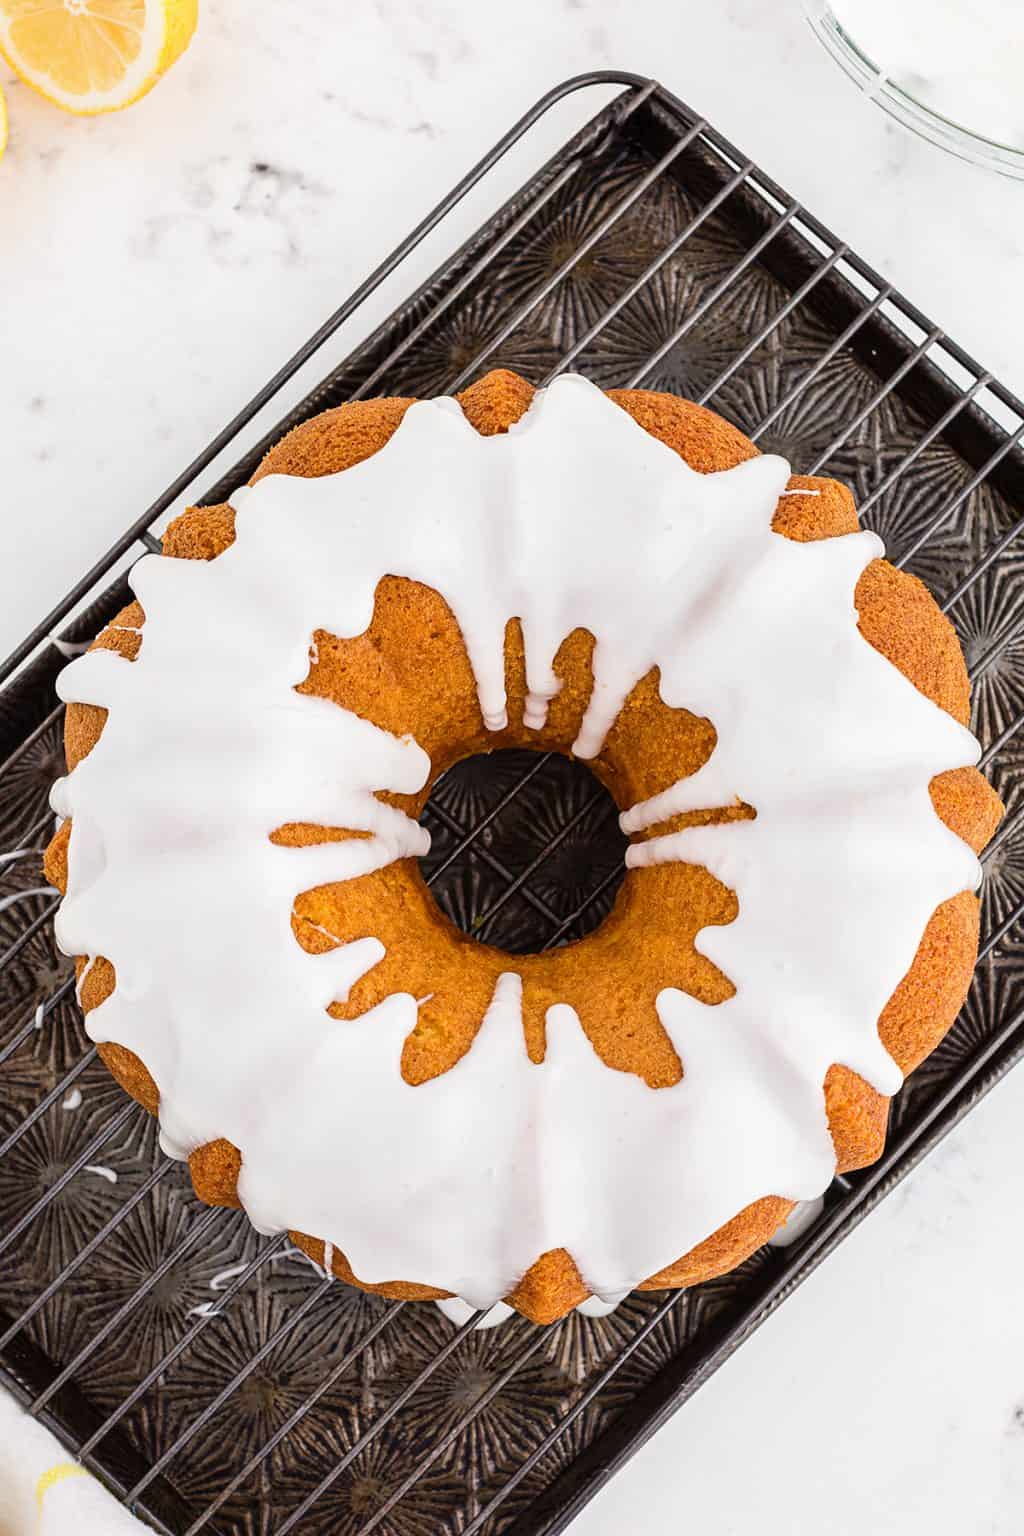 Lemon Bundt Cake Recipe With Pudding Buns In My Oven